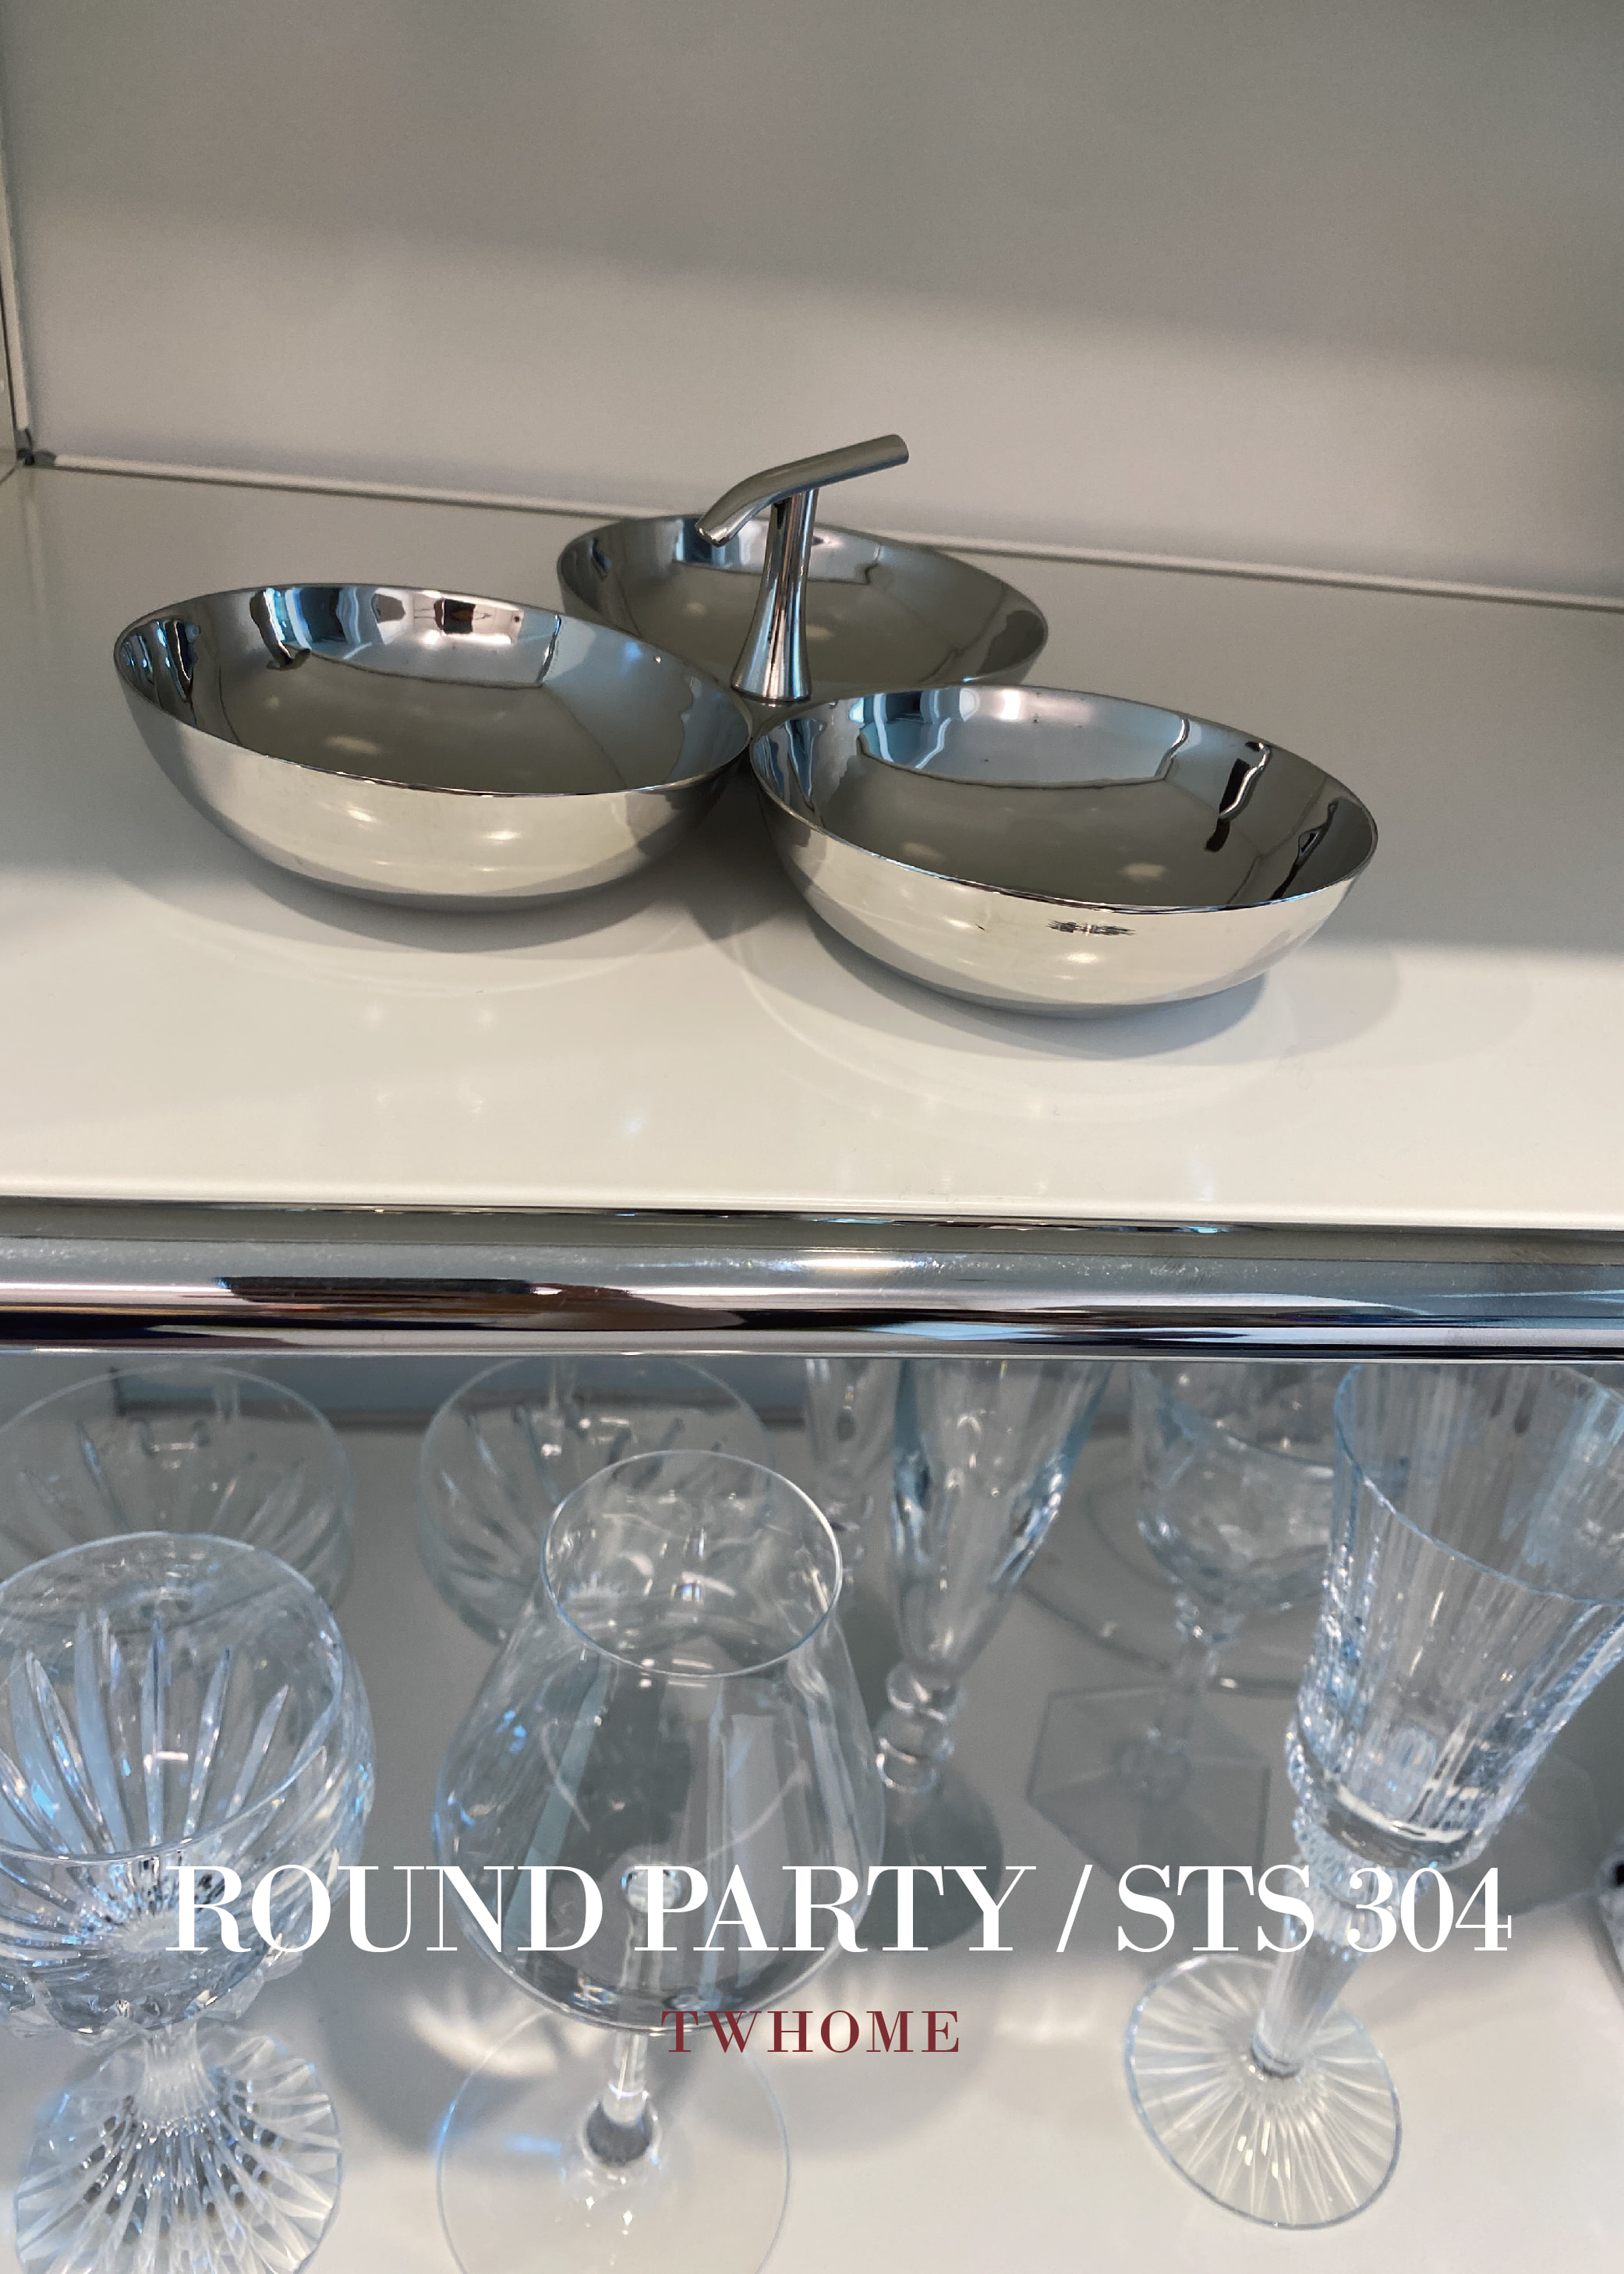 ROUND PARTY / STS 304